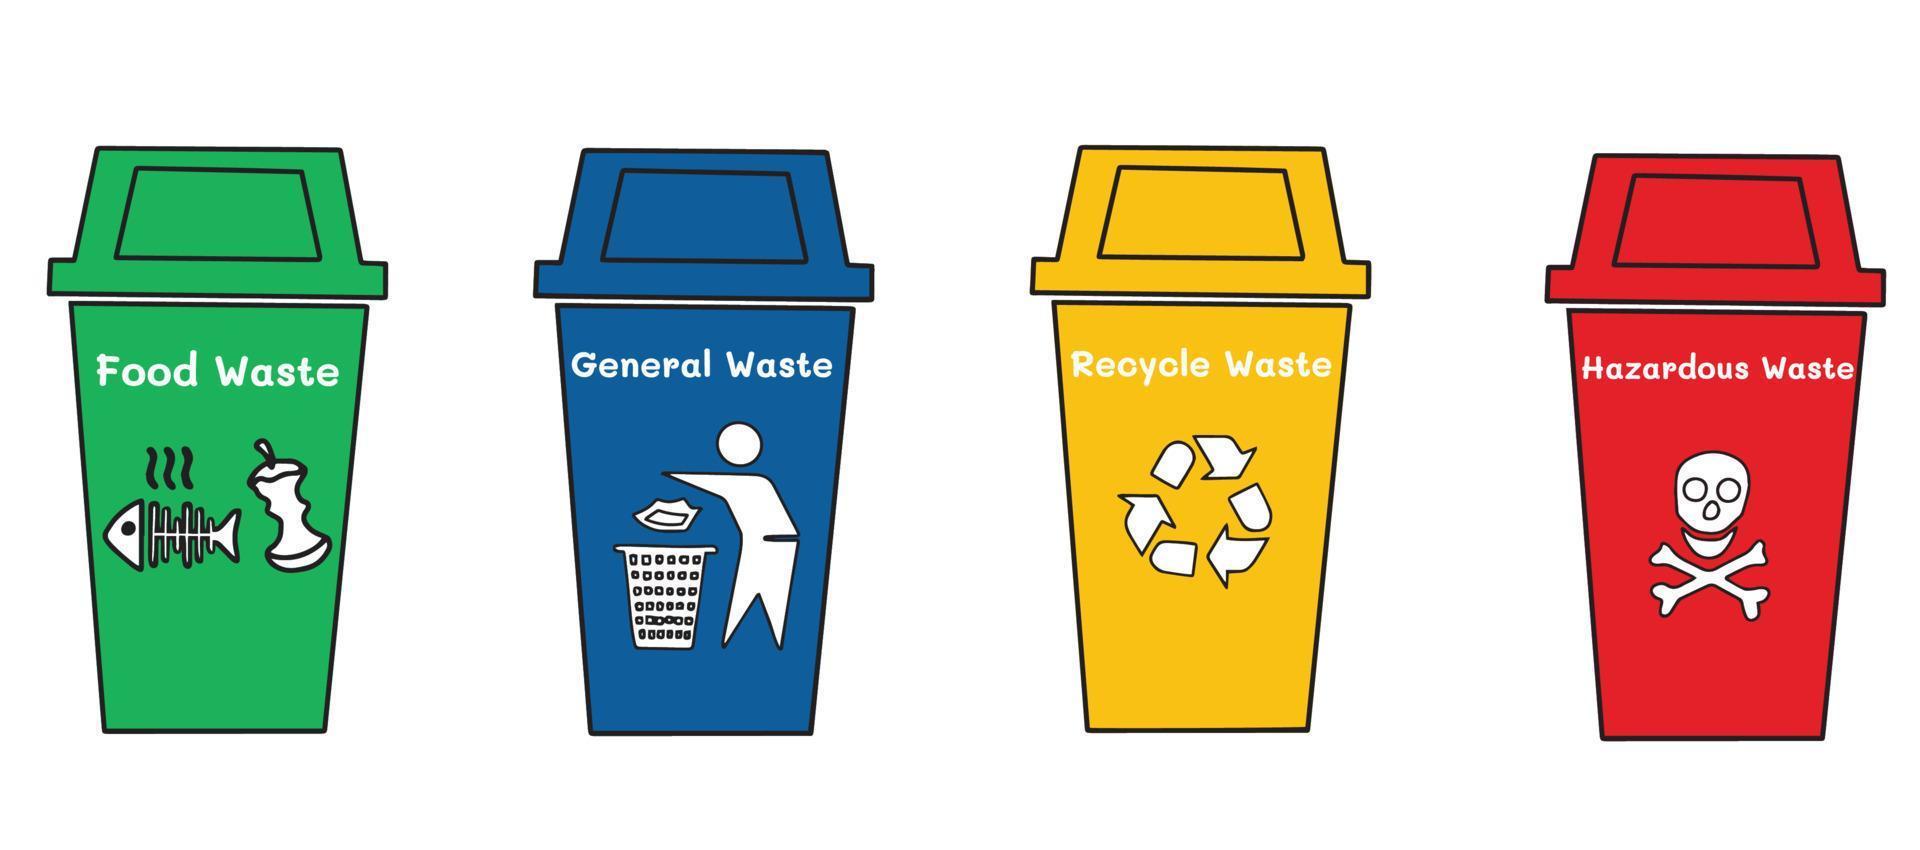 collection of Waste garbages sorting and recycle concept illustration. Vector web site design template. Different colors containers for different types of waste. General, Food, recycle and Hazardous.